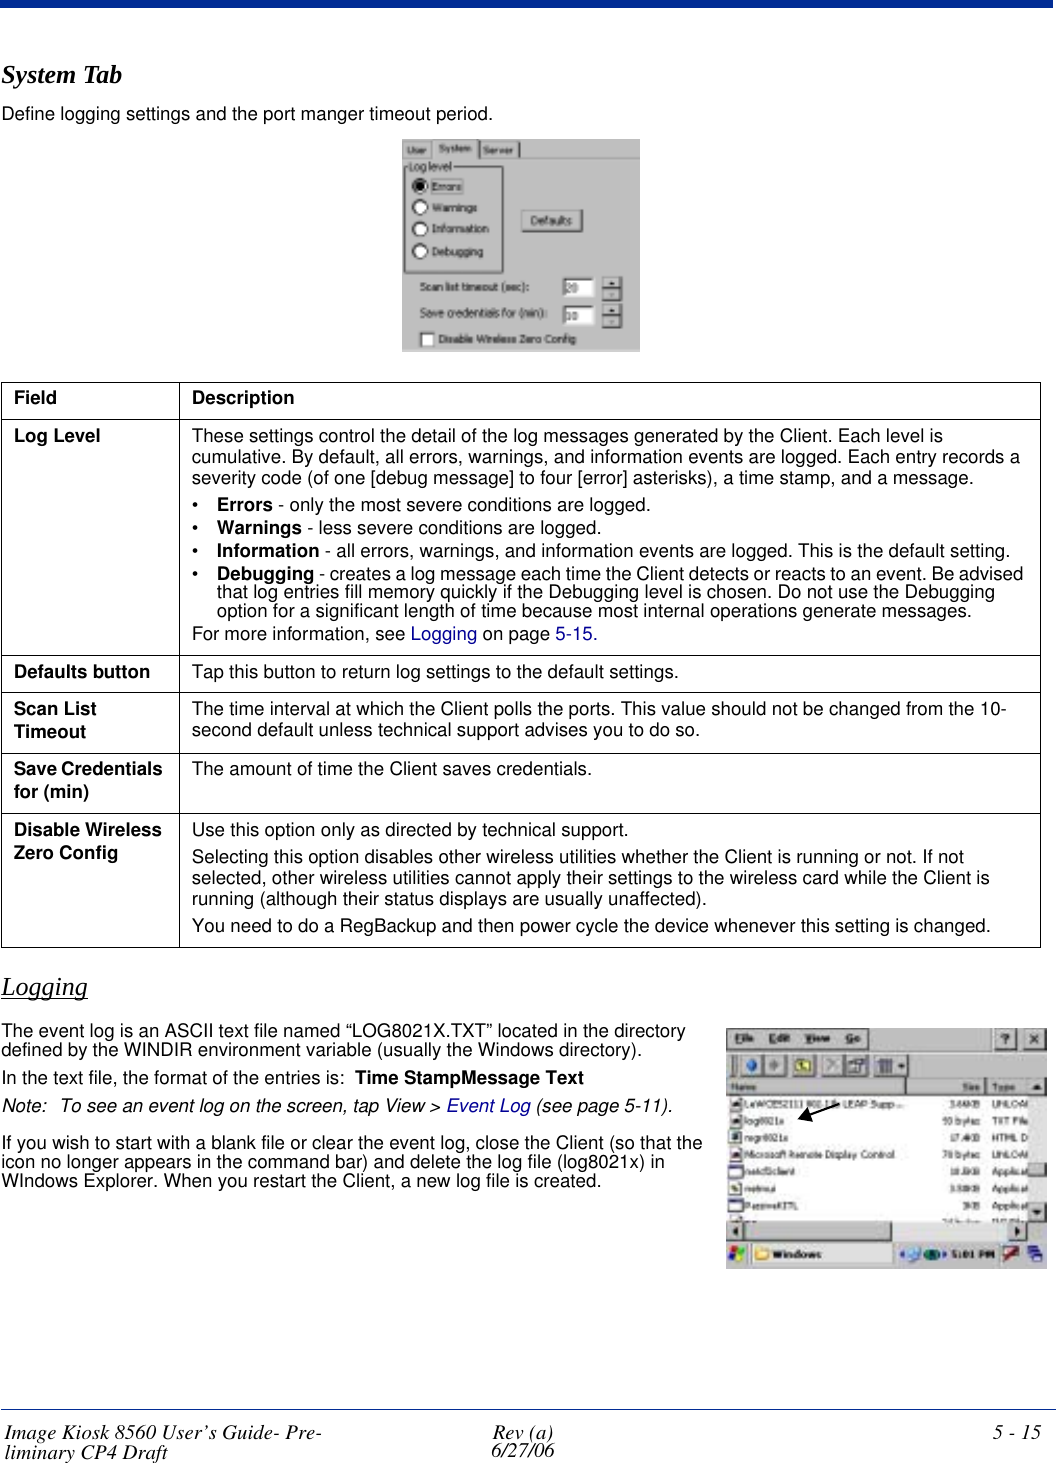 Image Kiosk 8560 User’s Guide- Pre-liminary CP4 Draft Rev (a)6/27/06 5 - 15System TabDefine logging settings and the port manger timeout period.Field DescriptionLog Level These settings control the detail of the log messages generated by the Client. Each level is cumulative. By default, all errors, warnings, and information events are logged. Each entry records a severity code (of one [debug message] to four [error] asterisks), a time stamp, and a message.•Errors - only the most severe conditions are logged.•Warnings - less severe conditions are logged.•Information - all errors, warnings, and information events are logged. This is the default setting.•Debugging - creates a log message each time the Client detects or reacts to an event. Be advised that log entries fill memory quickly if the Debugging level is chosen. Do not use the Debugging option for a significant length of time because most internal operations generate messages.For more information, see Logging on page 5-15.Defaults button Tap this button to return log settings to the default settings.Scan List Timeout The time interval at which the Client polls the ports. This value should not be changed from the 10-second default unless technical support advises you to do so.Save Credentials for (min) The amount of time the Client saves credentials.Disable Wireless Zero Config Use this option only as directed by technical support.Selecting this option disables other wireless utilities whether the Client is running or not. If not selected, other wireless utilities cannot apply their settings to the wireless card while the Client is running (although their status displays are usually unaffected). You need to do a RegBackup and then power cycle the device whenever this setting is changed.LoggingThe event log is an ASCII text file named “LOG8021X.TXT” located in the directory defined by the WINDIR environment variable (usually the Windows directory). In the text file, the format of the entries is:  Time StampMessage TextNote: To see an event log on the screen, tap View &gt; Event Log (see page 5-11). If you wish to start with a blank file or clear the event log, close the Client (so that the icon no longer appears in the command bar) and delete the log file (log8021x) in WIndows Explorer. When you restart the Client, a new log file is created.                                        